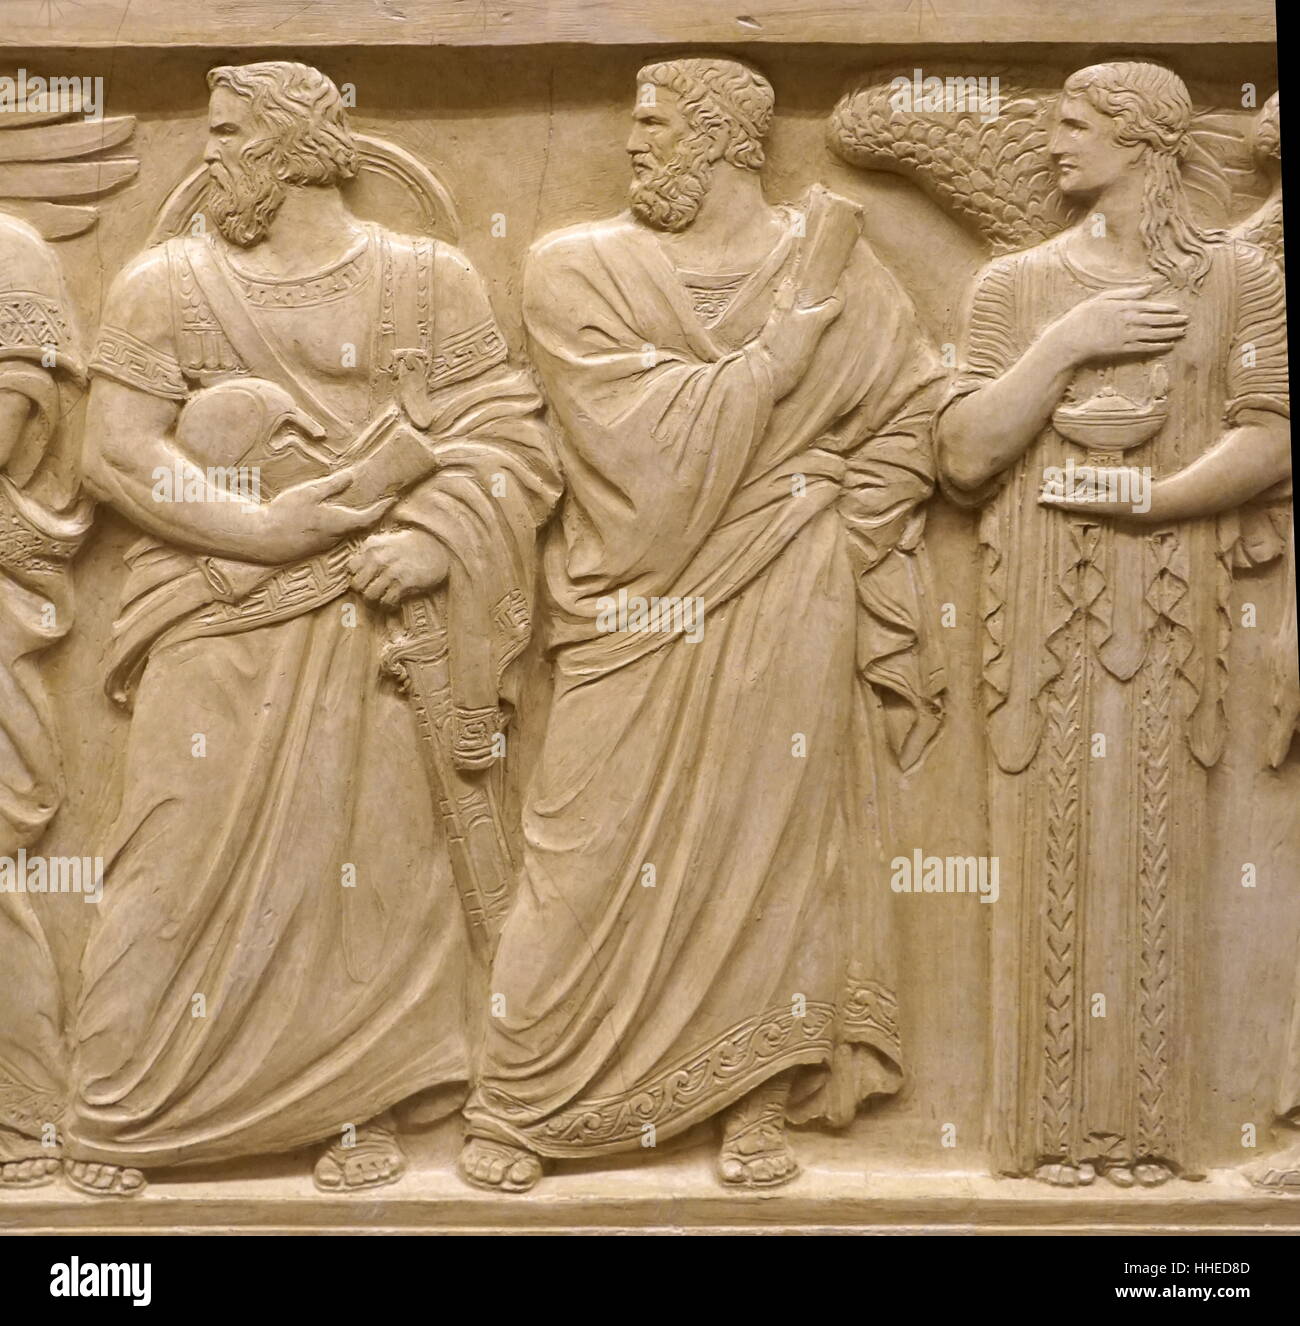 Relief depicting the figure of Lycurgus (c. 900 – 800 BC) the legendary lawgiver of Sparta. At the right of Lycurgus are Solon and a representation of the Light of Wisdom. US Supreme Court, Washington DC. USA. Stock Photo